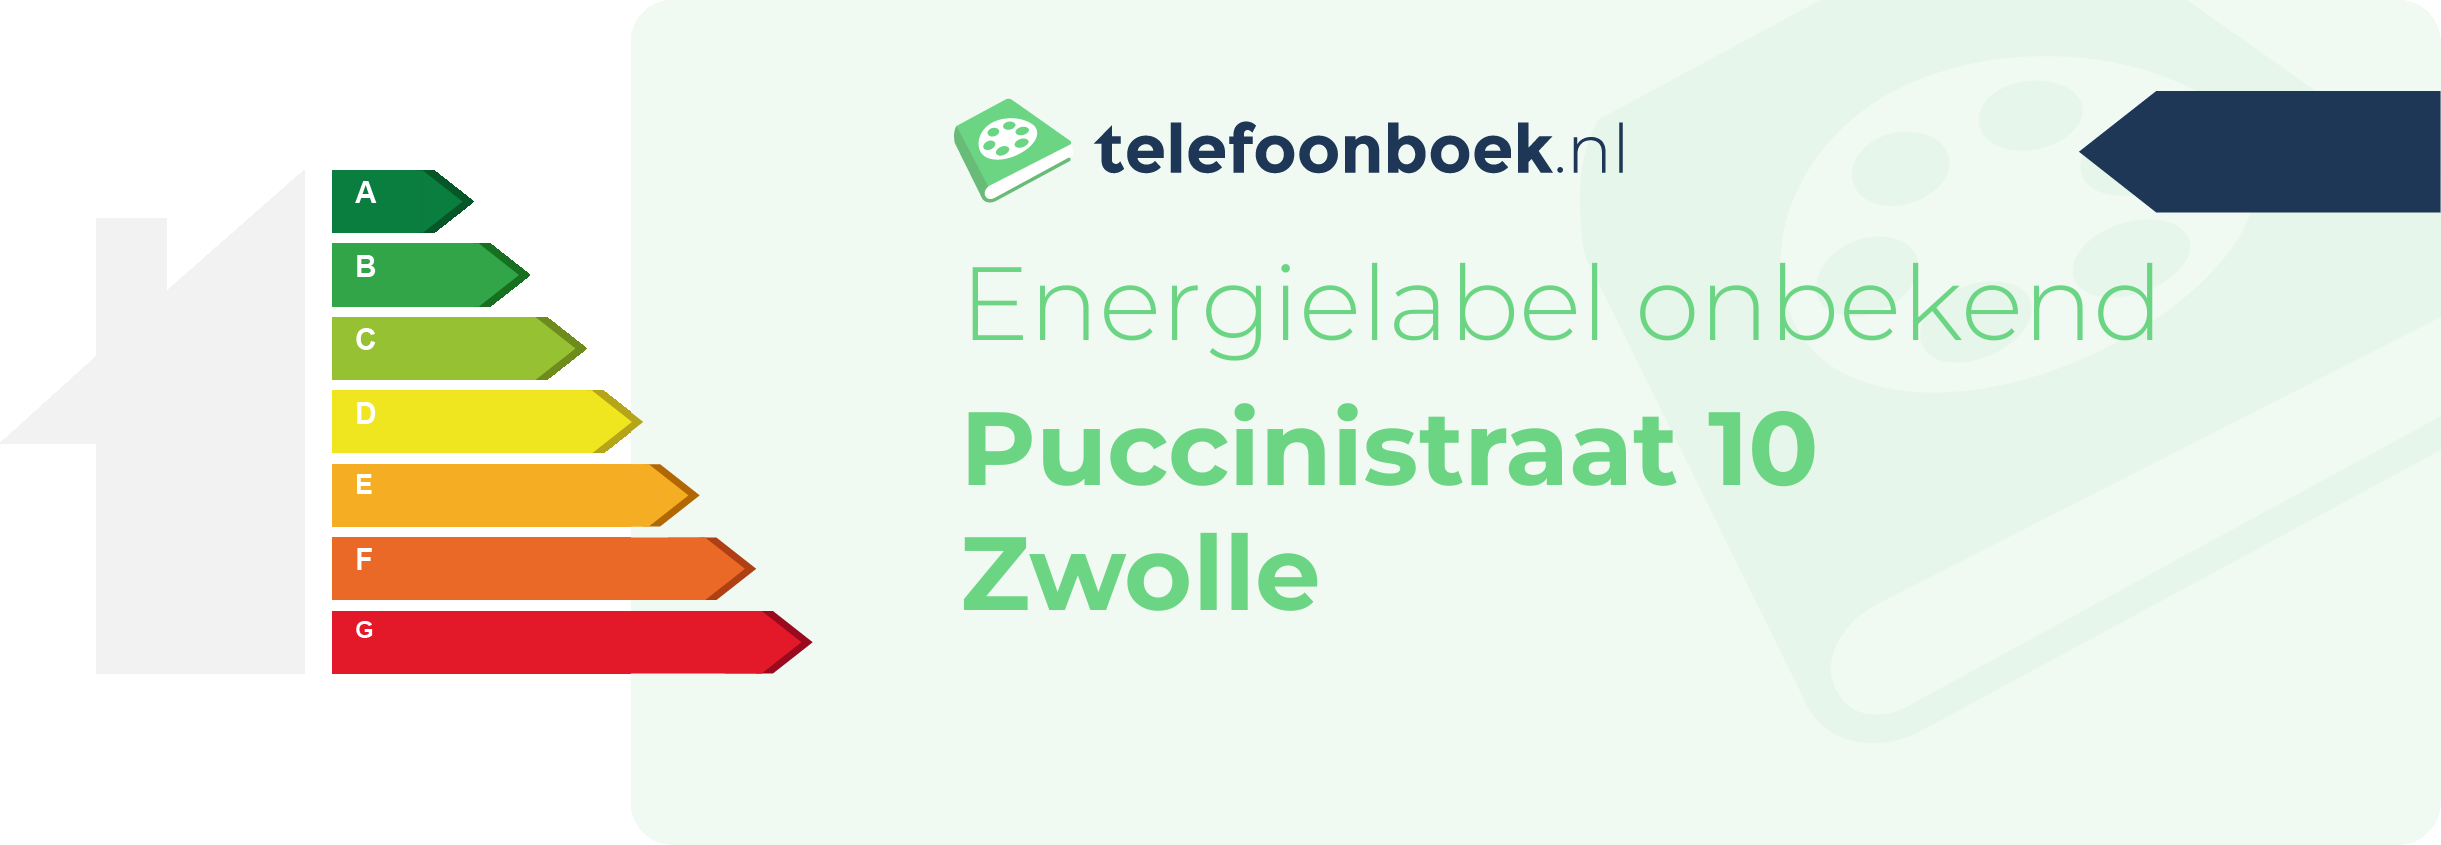 Energielabel Puccinistraat 10 Zwolle